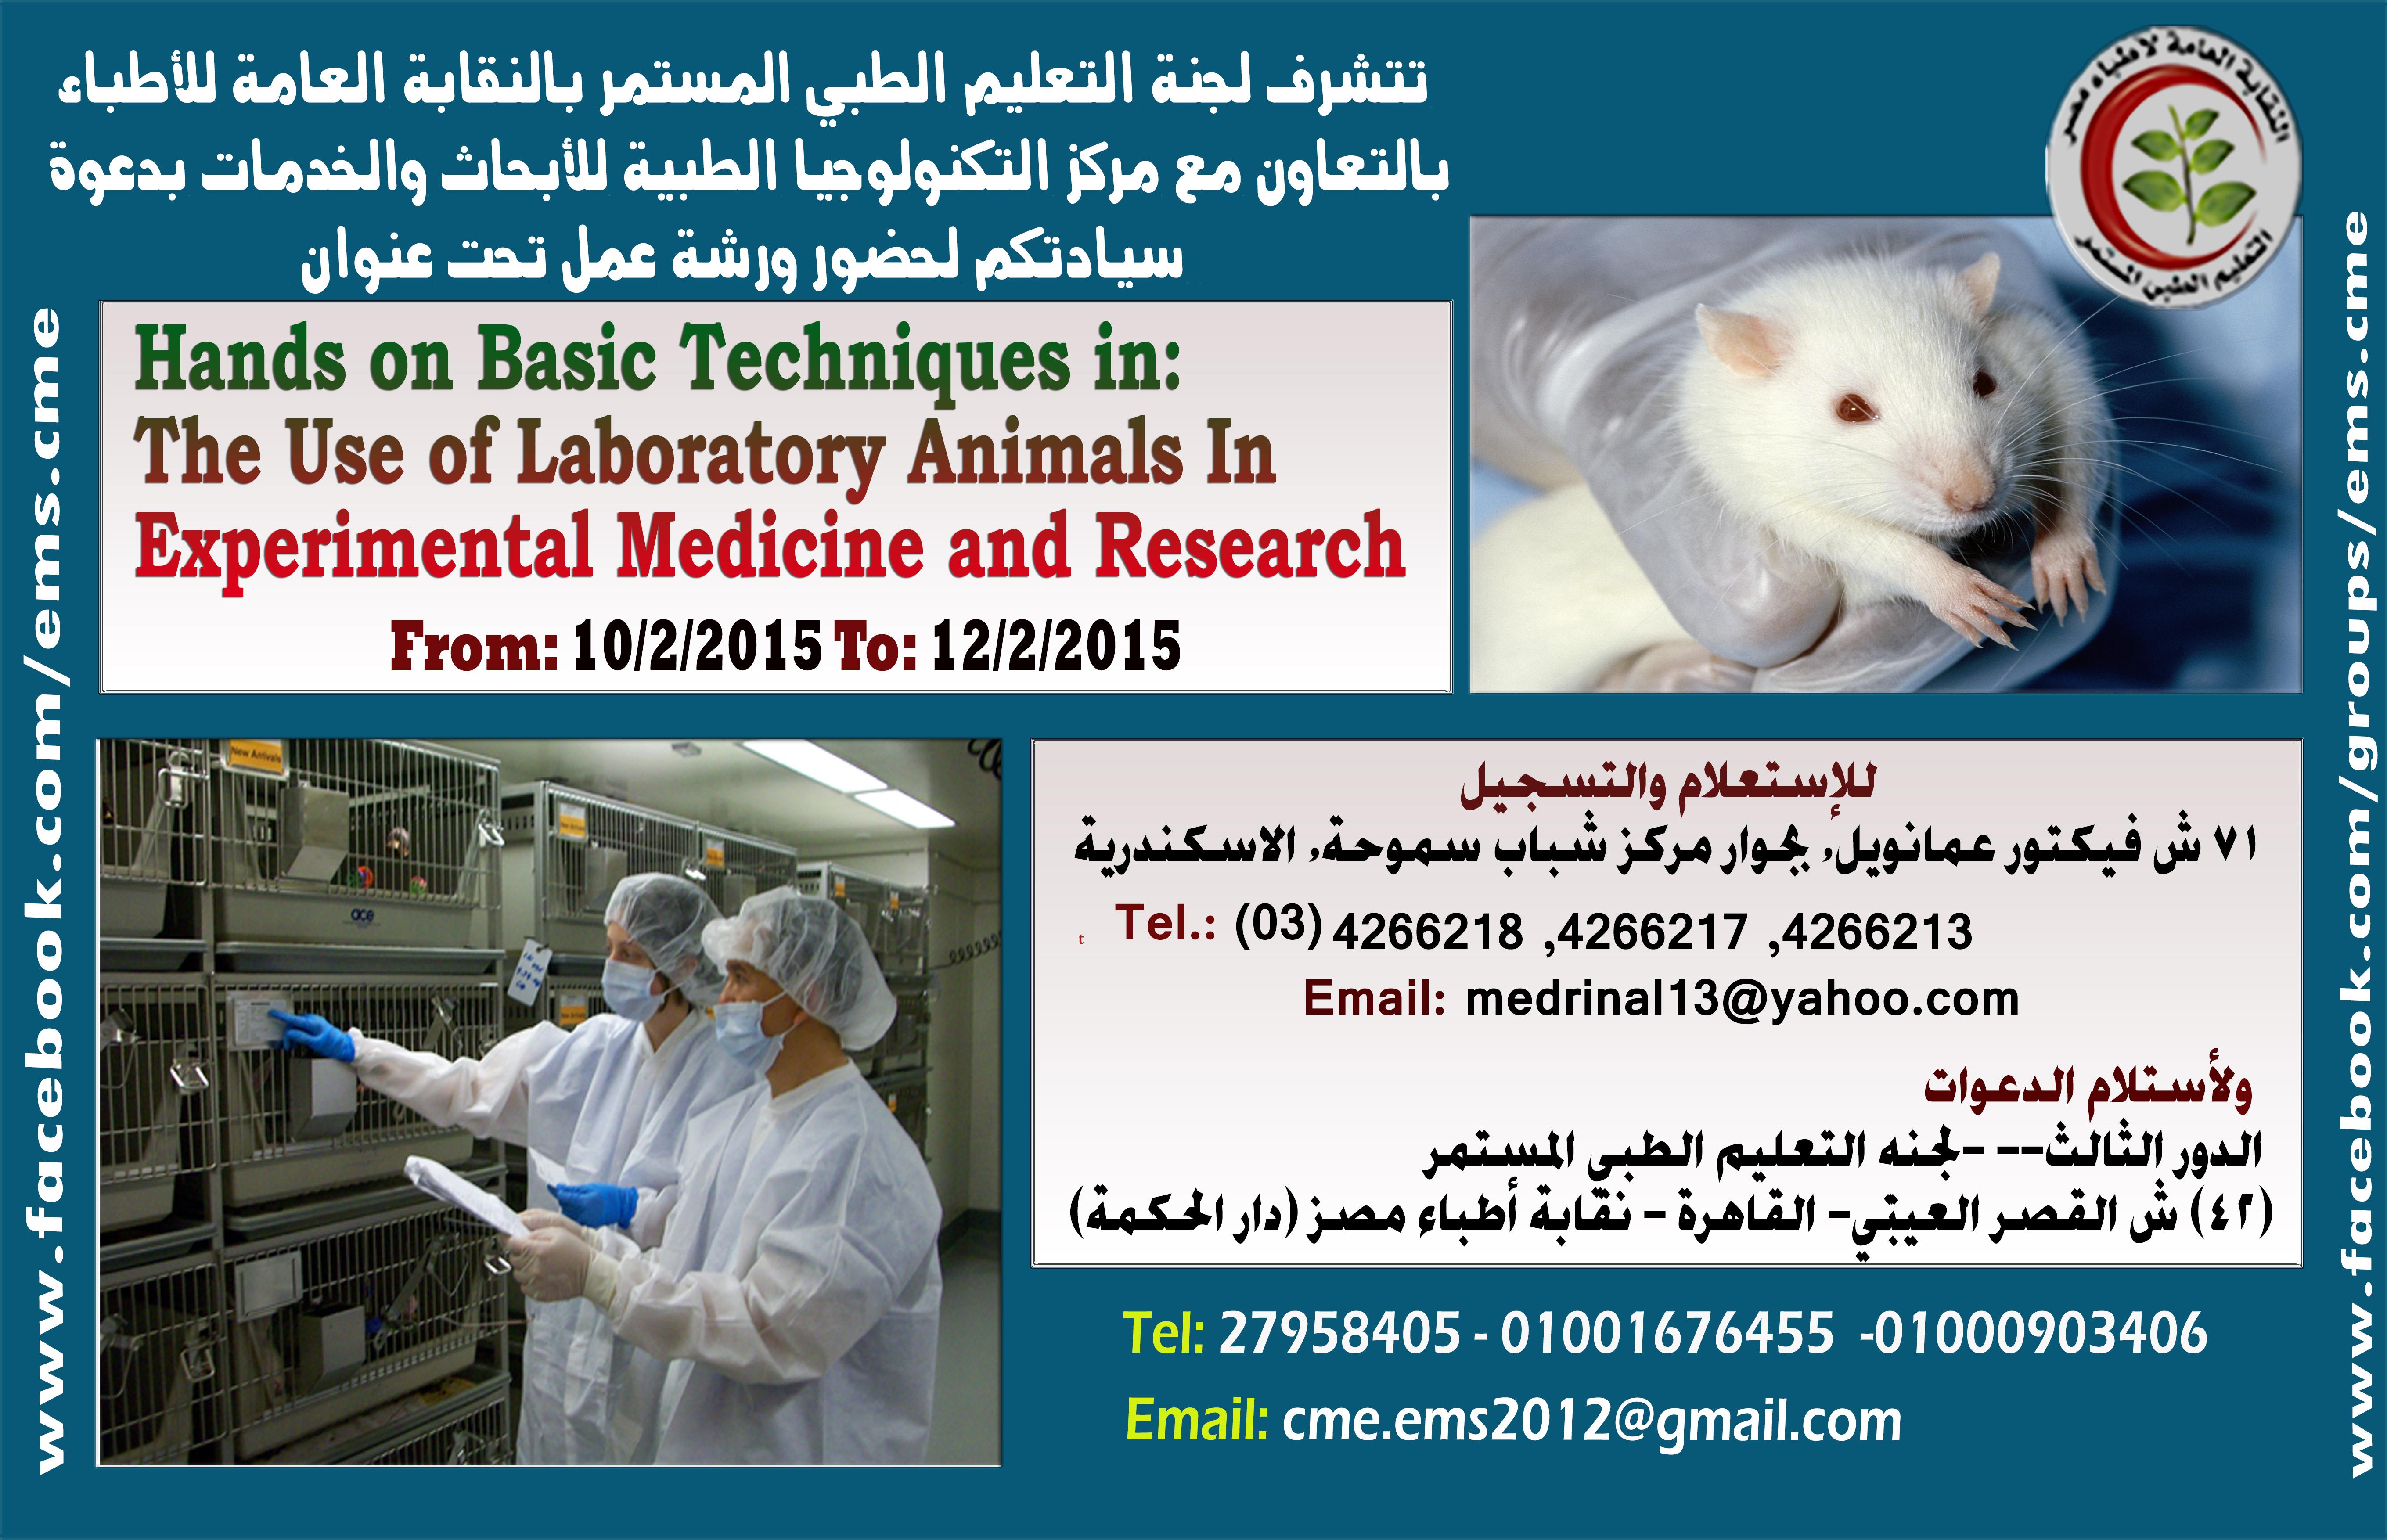 Hands on Basic Techniques needed in: The Use of Laboratory Animals in Experimental Medicine and Research